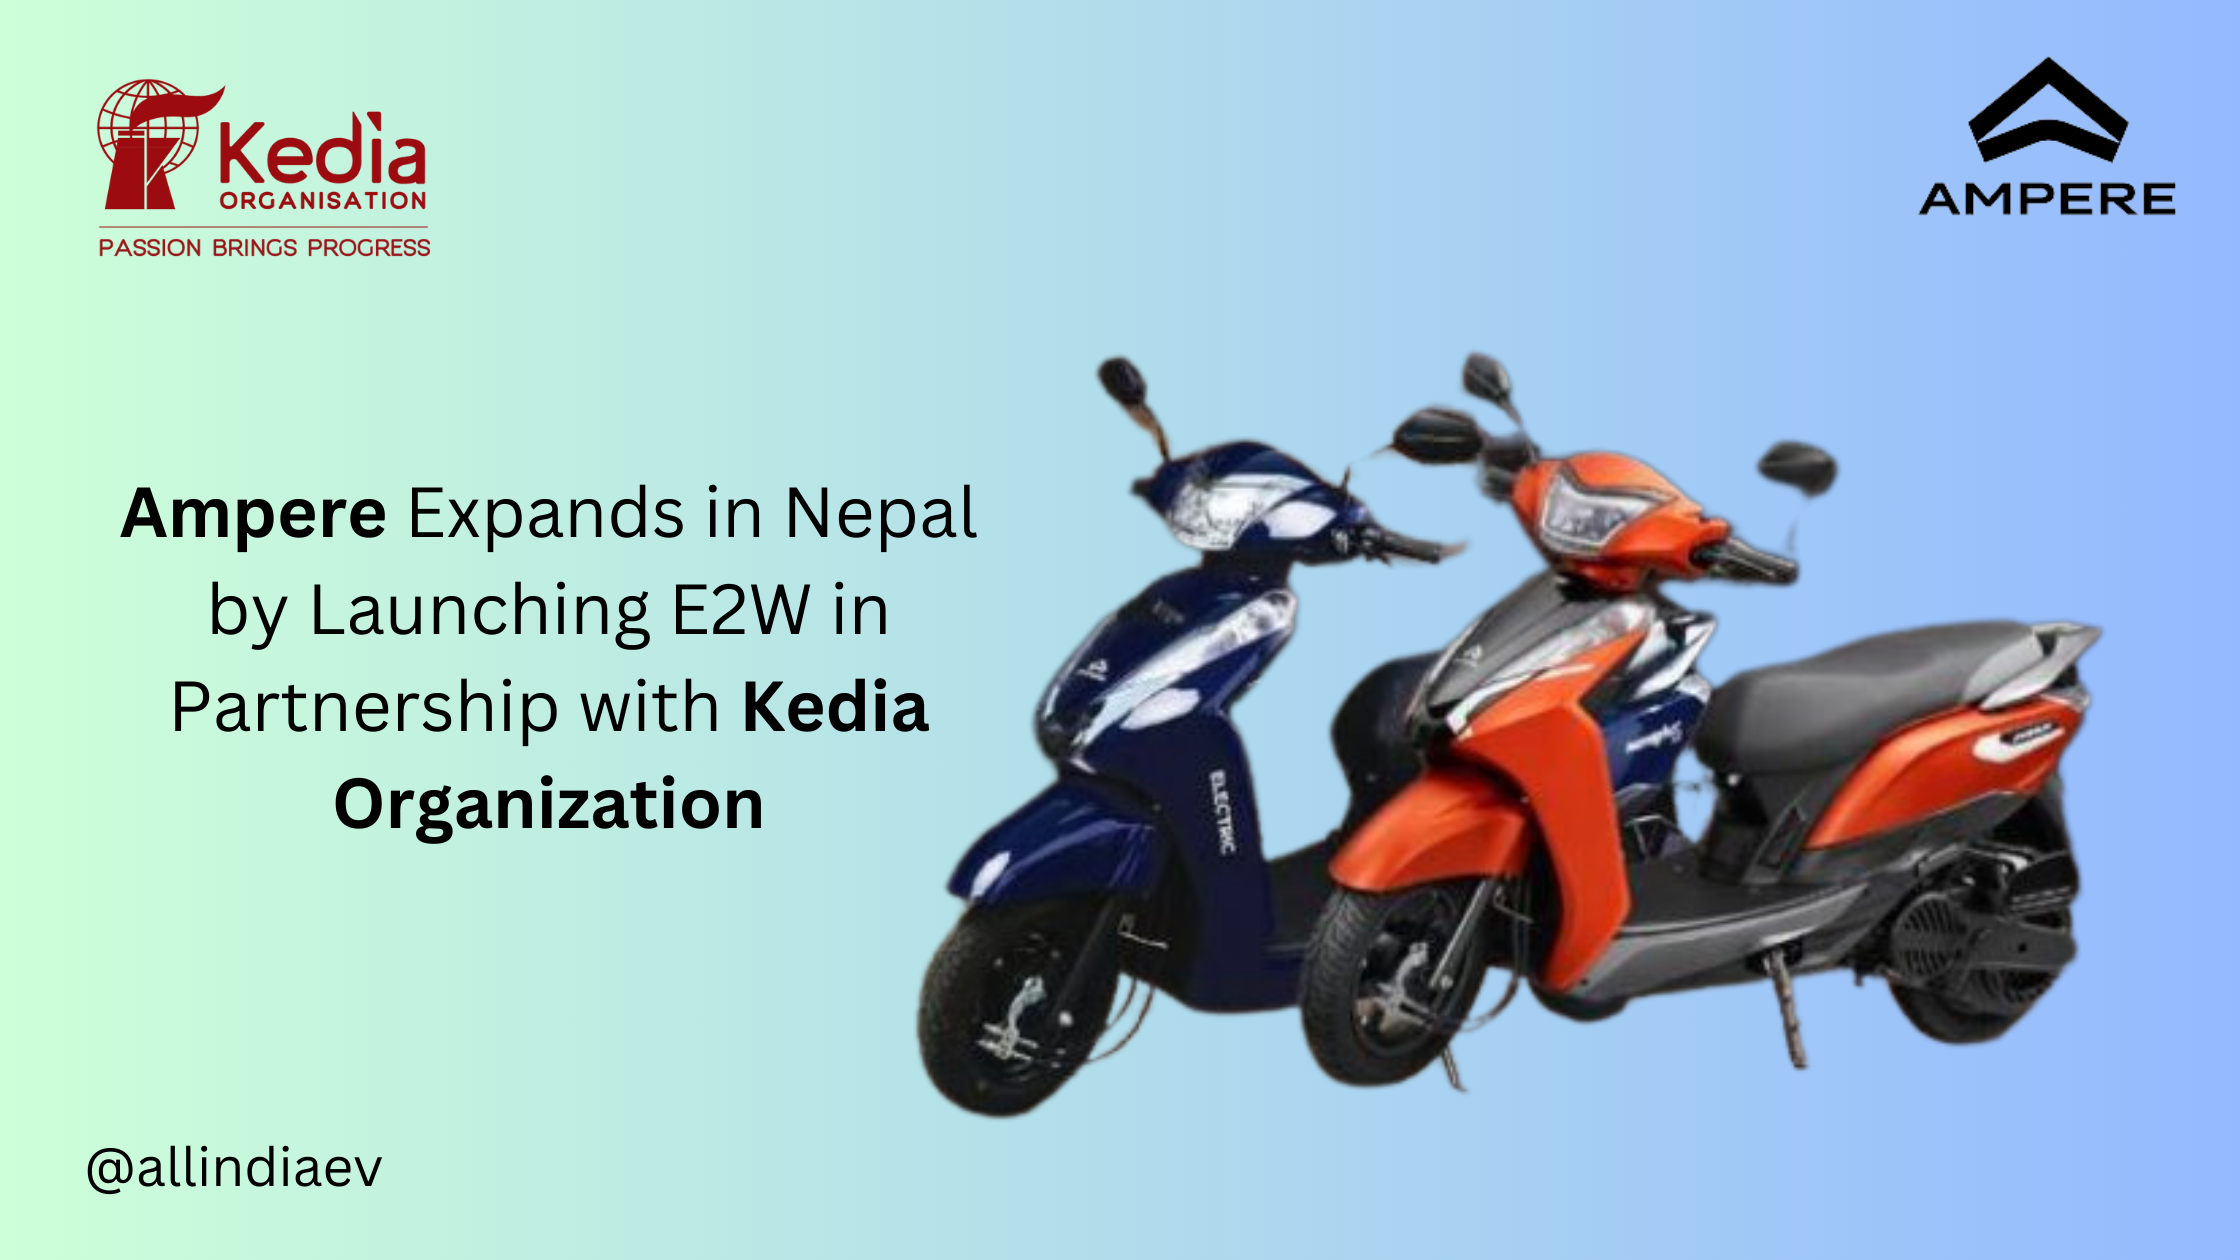 Ampere Expands in Nepal by Launching E2W in Partnership with Kedia Organization